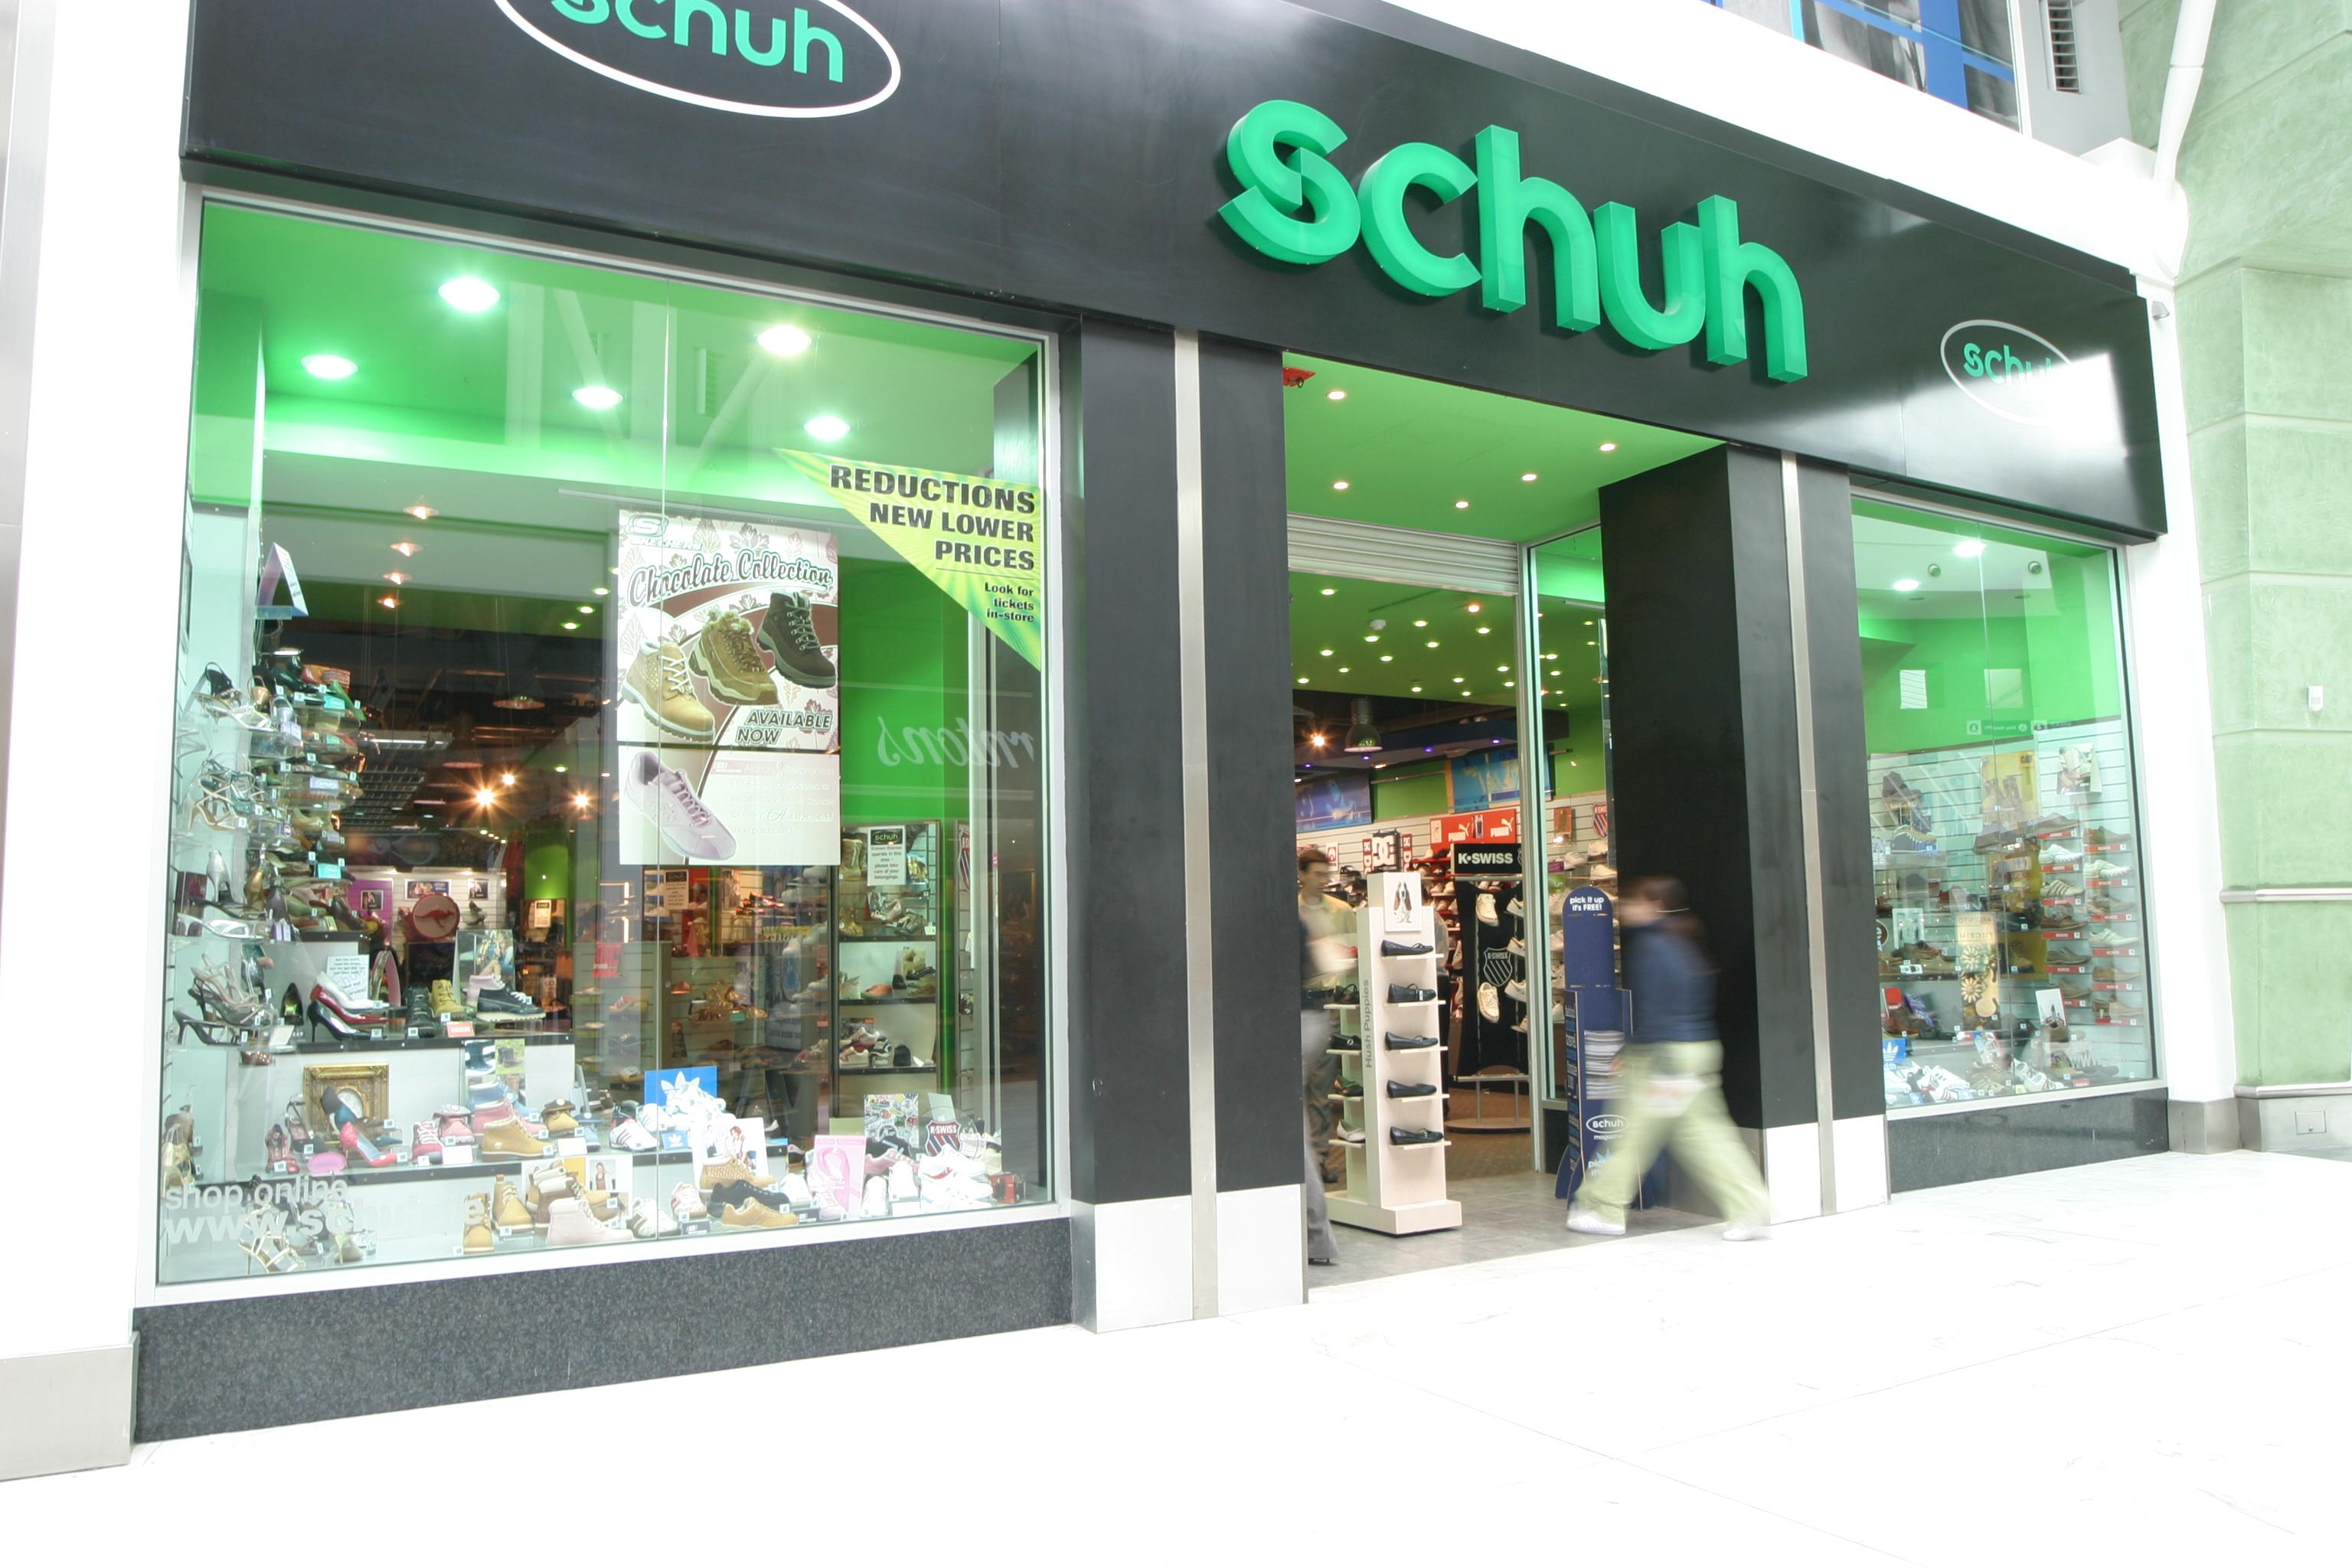 SDCC Source: Exterior of the Schuh shop, Liffey Valley Shopping Centre